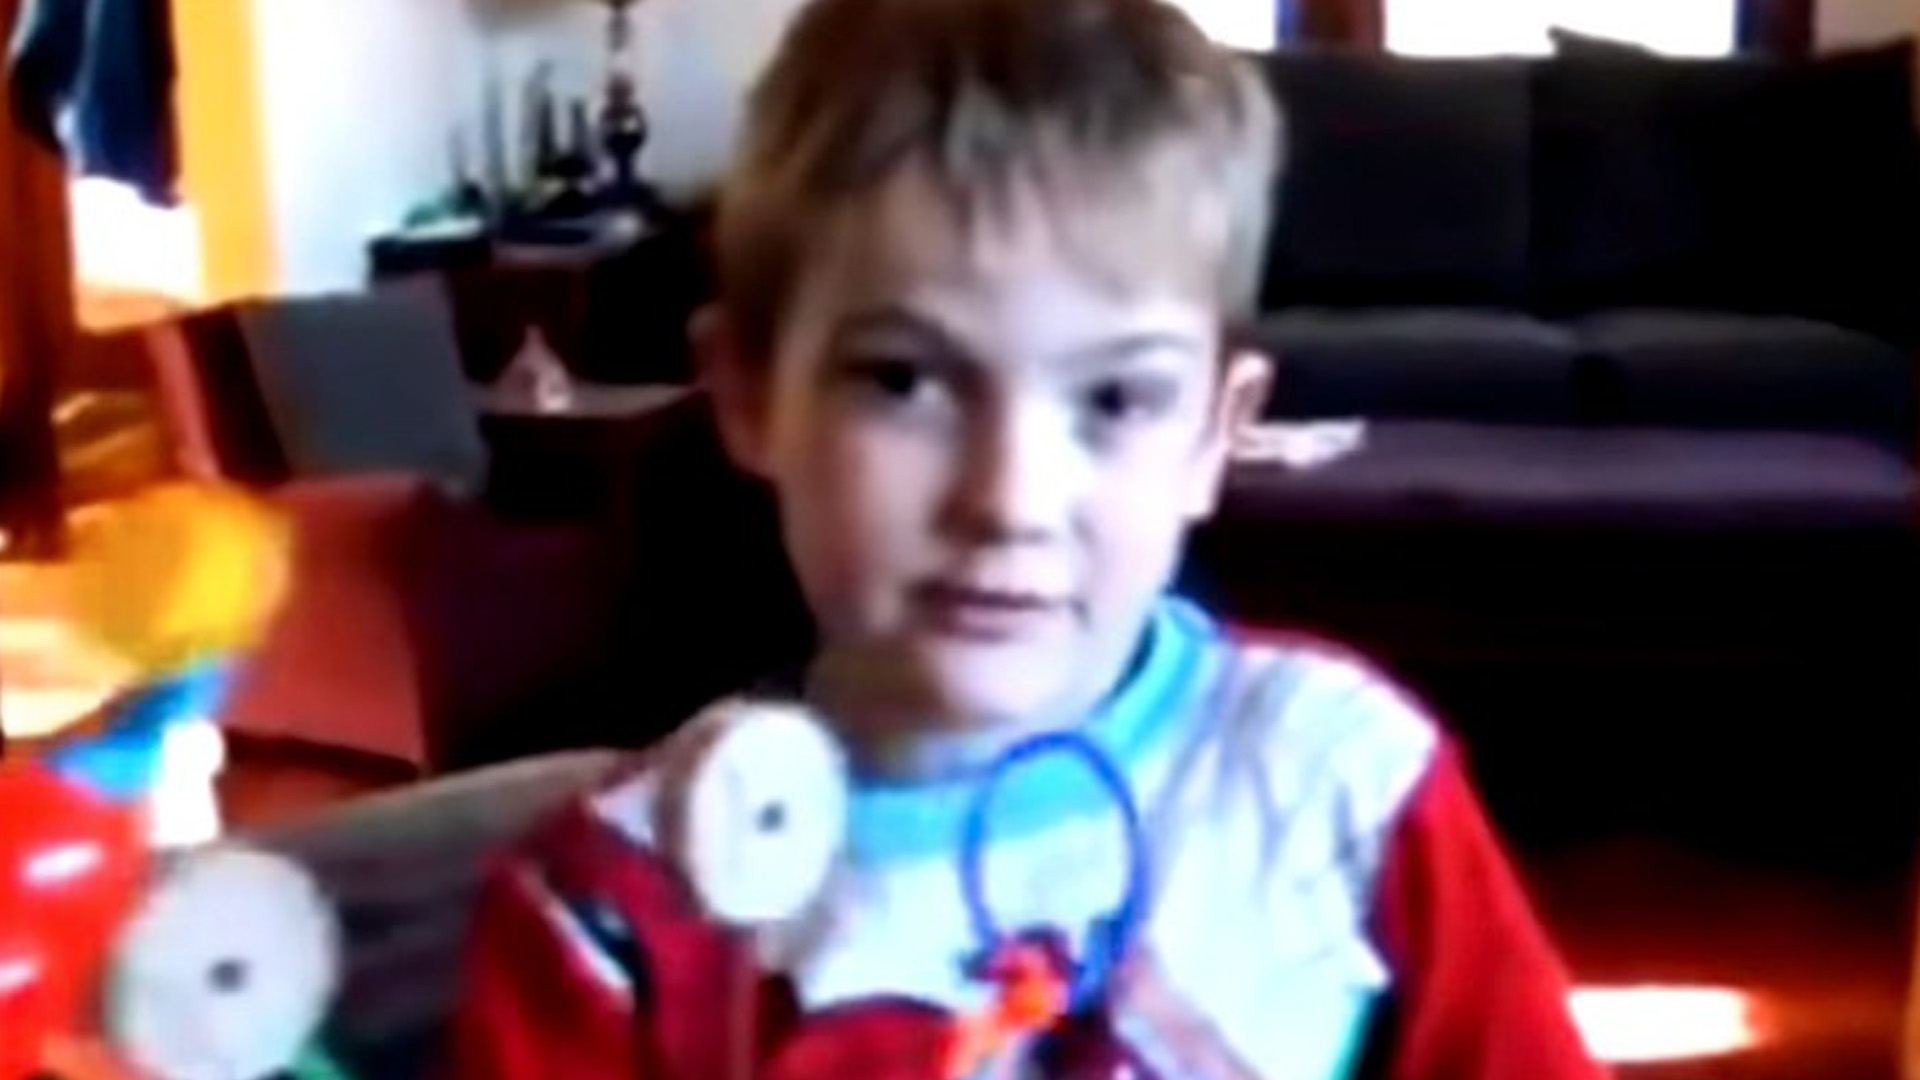 Timmothy Pitzen’s aunt shares concern over investigation & ‘2 day’ sighting gap as she sends message to missing boy [Video]